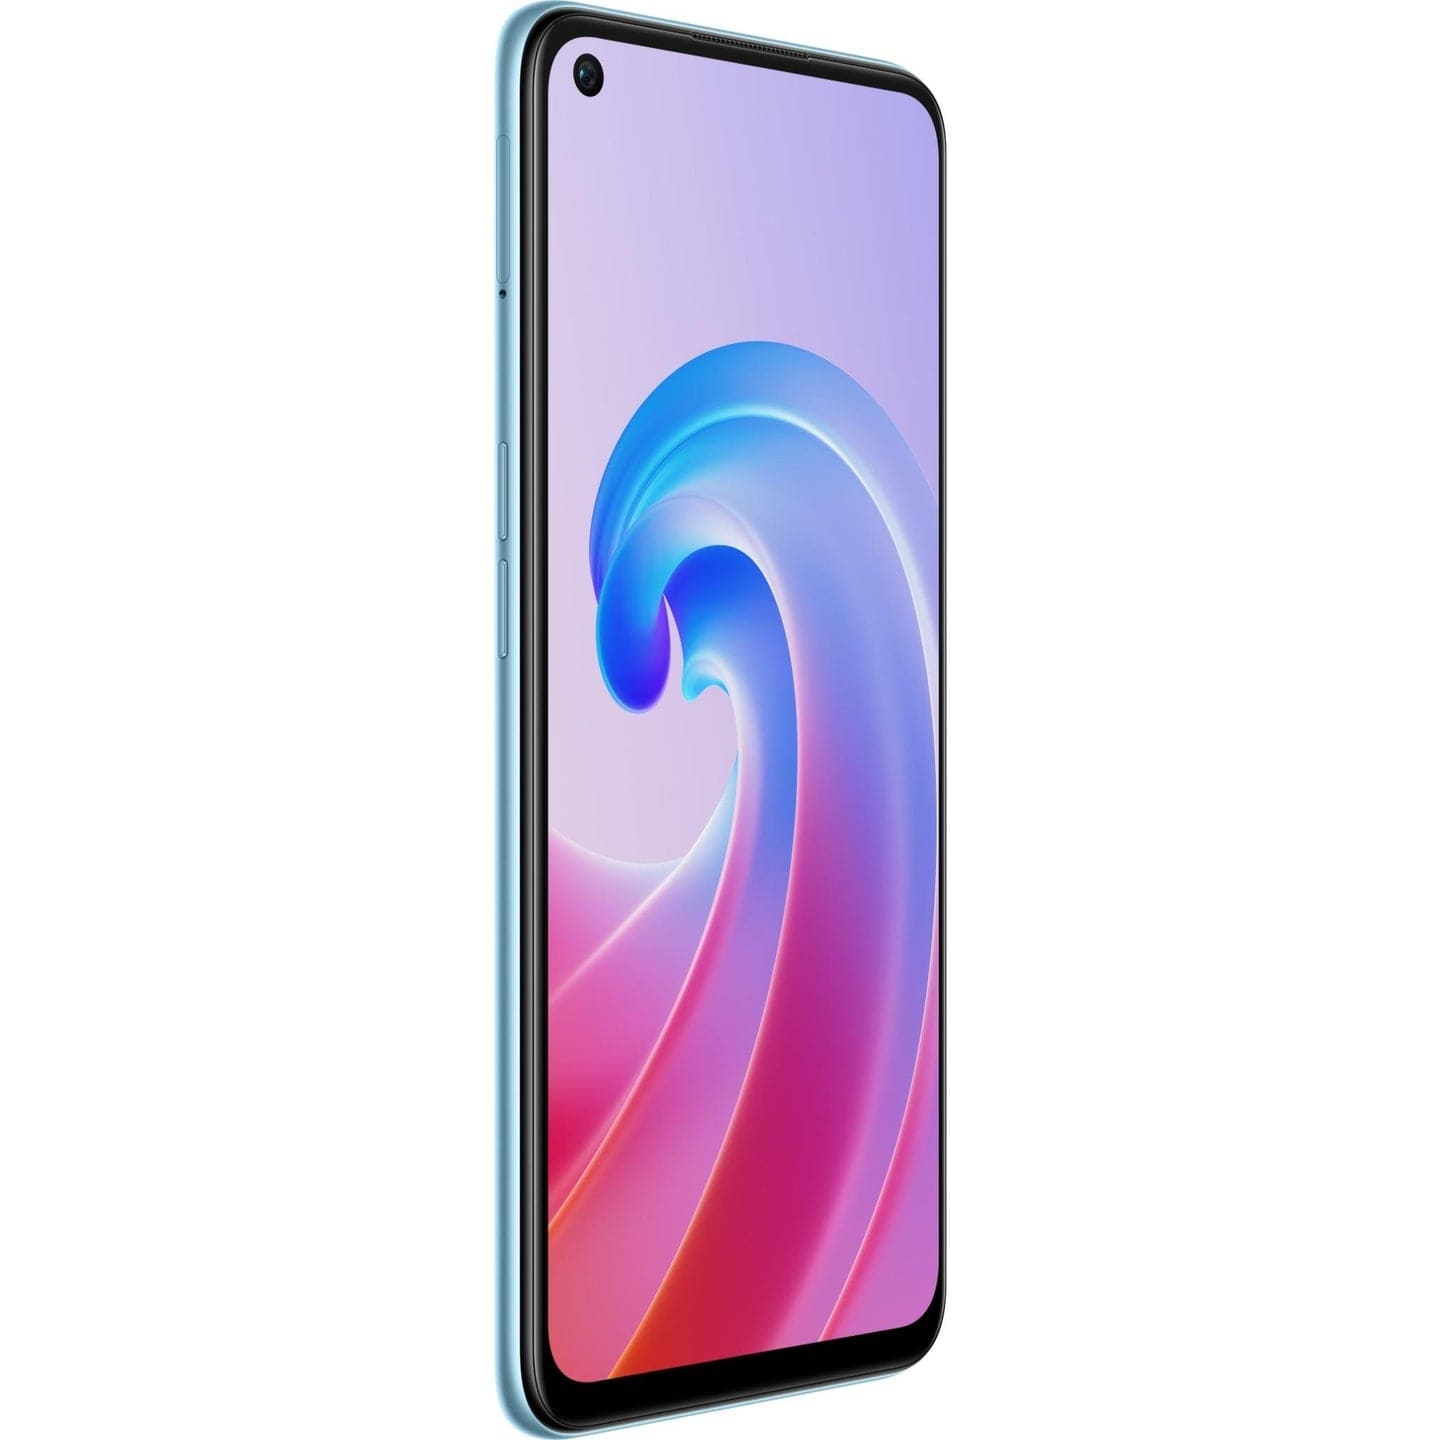 Oppo A96 128gb (sunset blue)